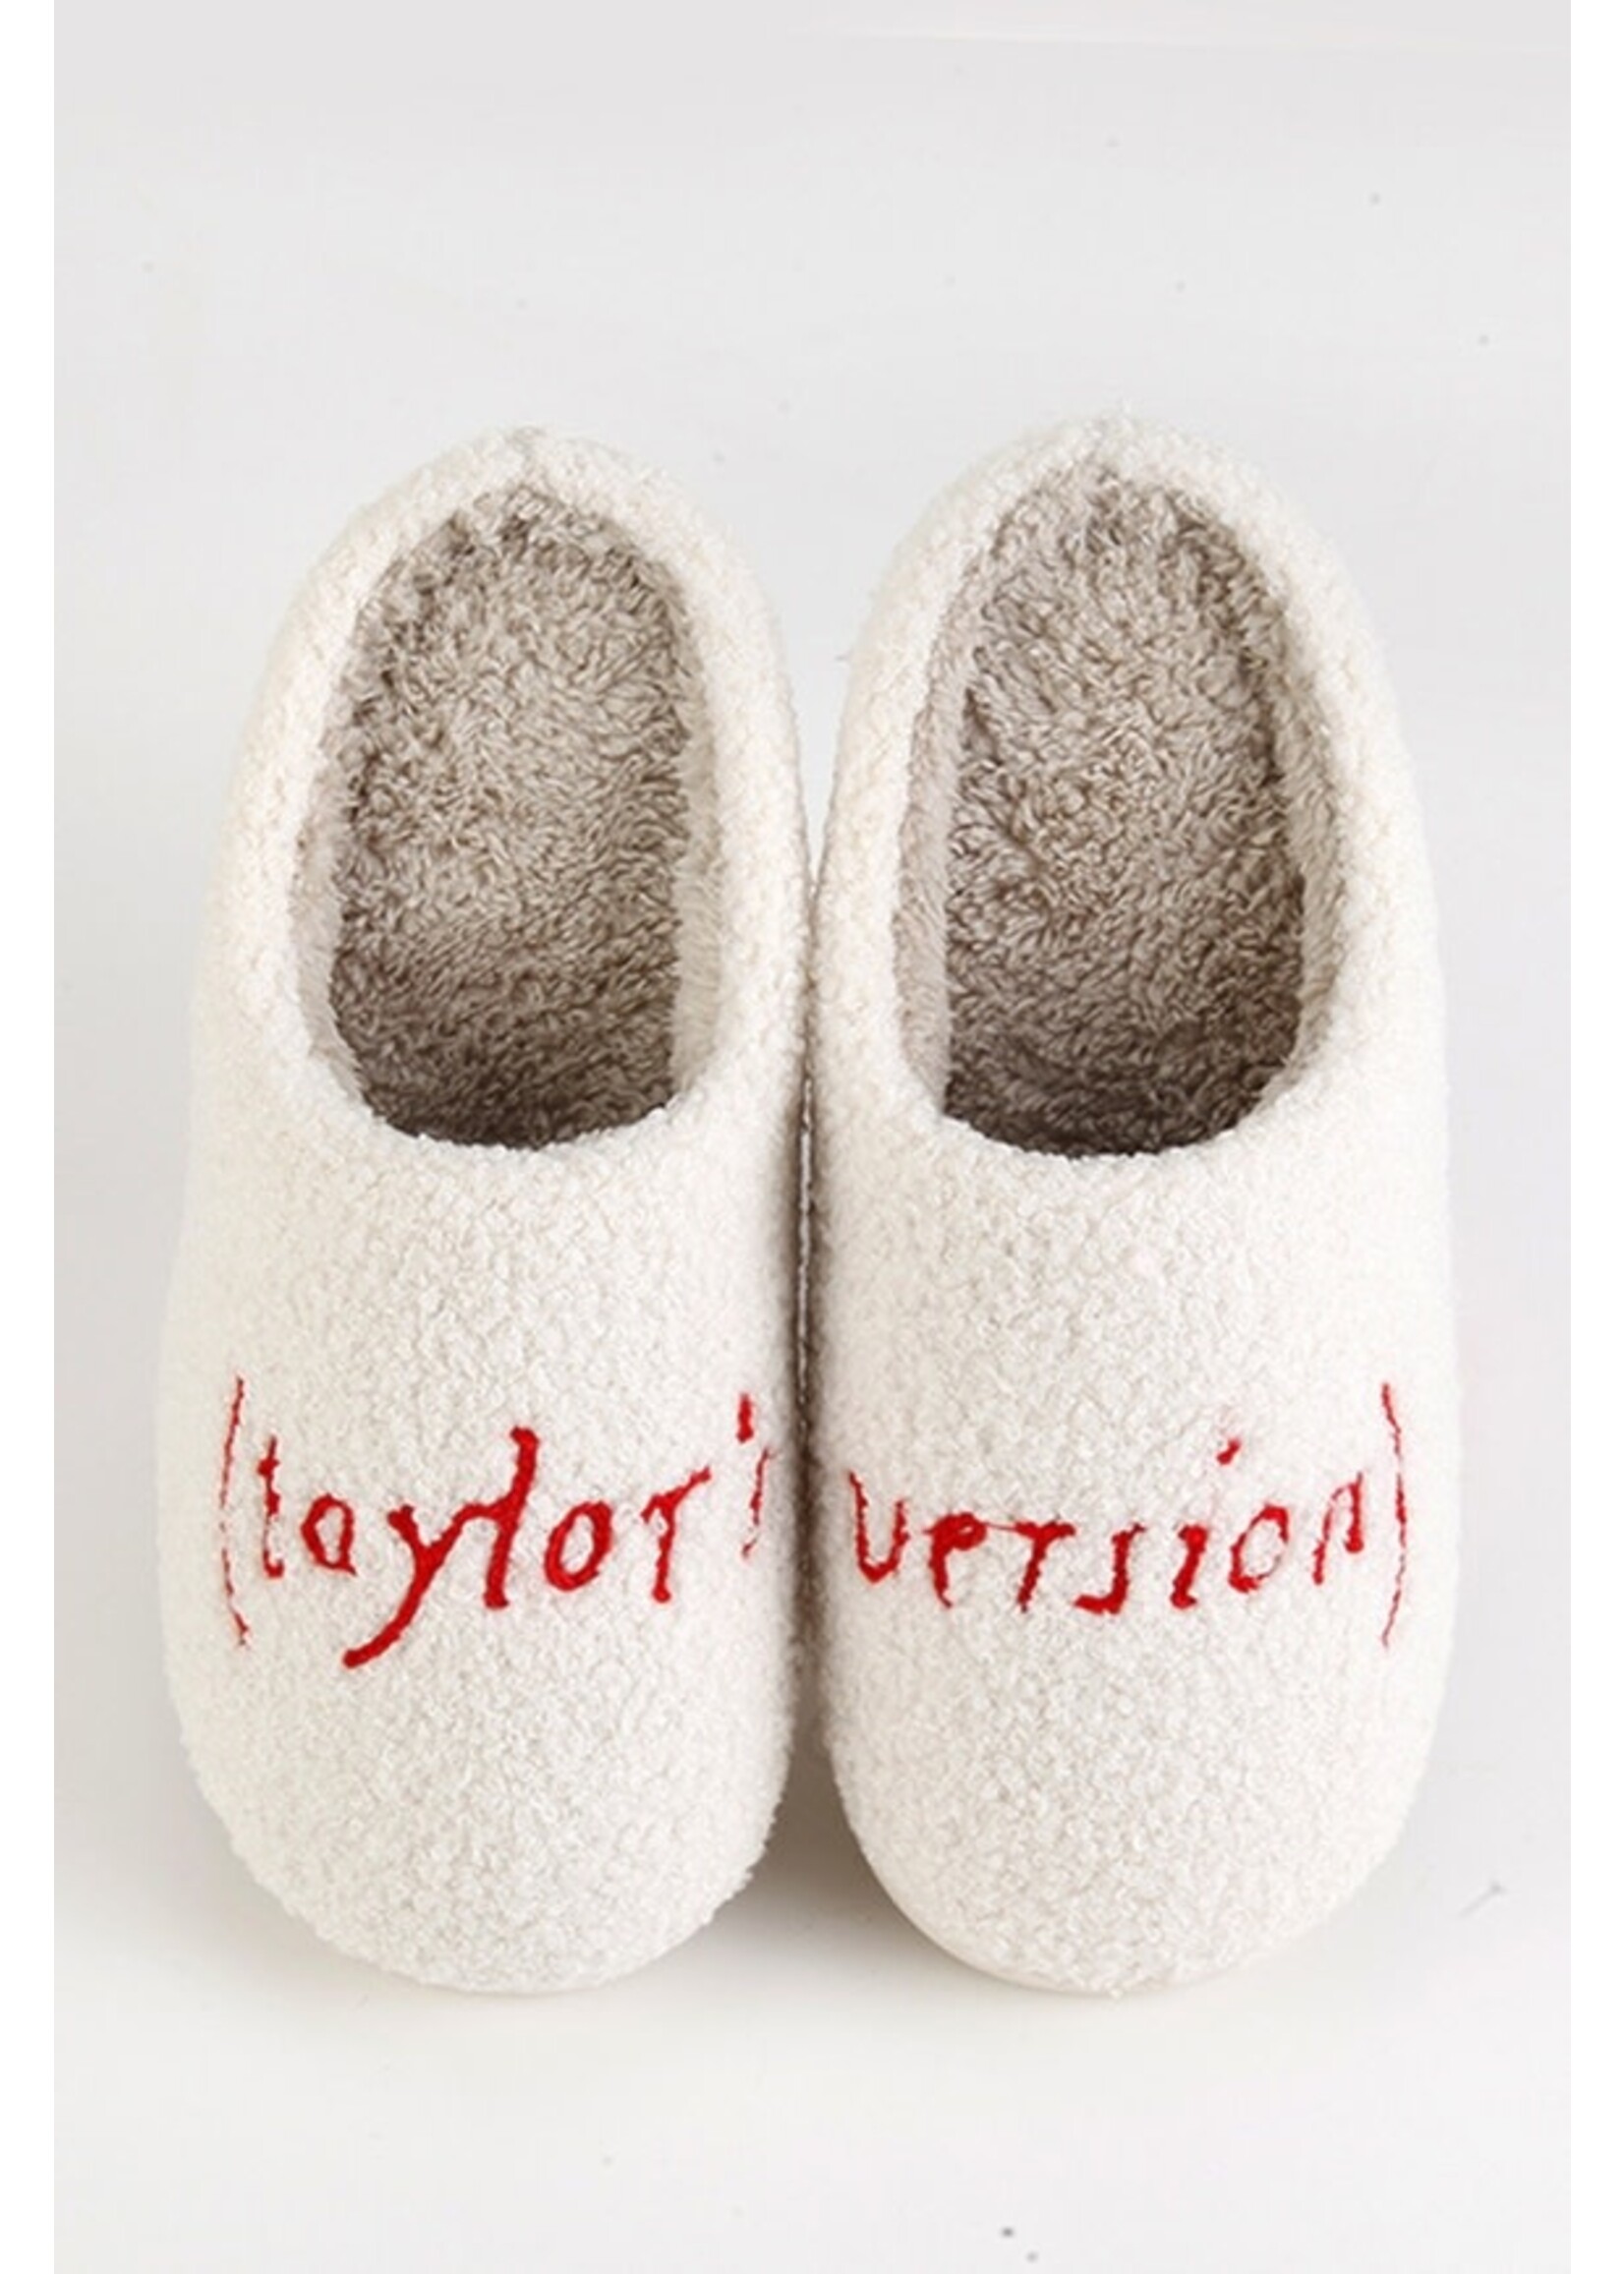 Taylor's Version Fleece Slippers Taylor Swiftie - For The Love of Shoes NY